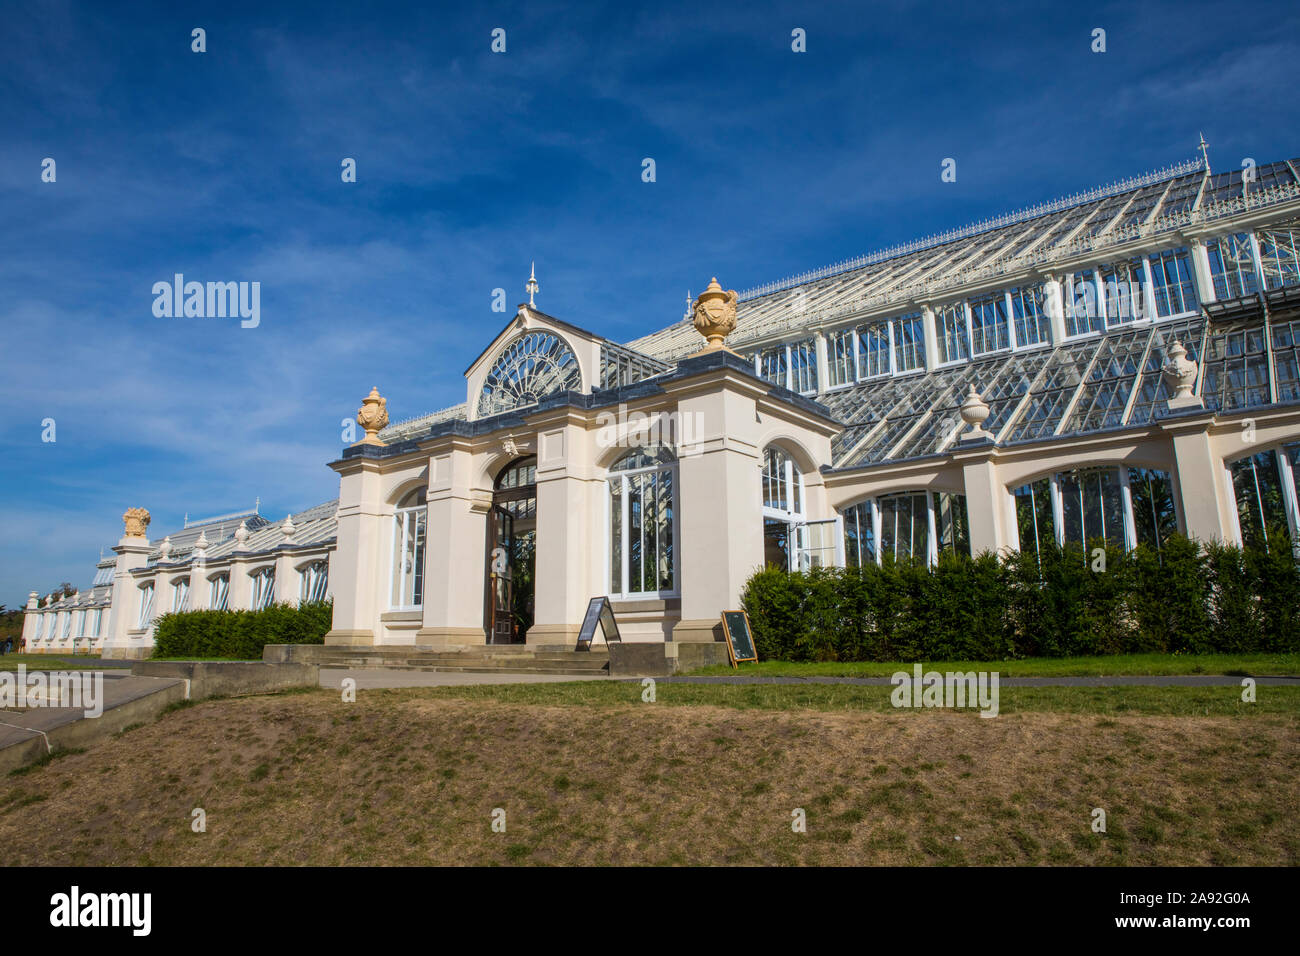 Surrey, UK - September 14th 2019: The iconic Temperate House at Kew Gardens in Surrey, UK. The Temperate House showcases the largest plants at Kew. Stock Photo